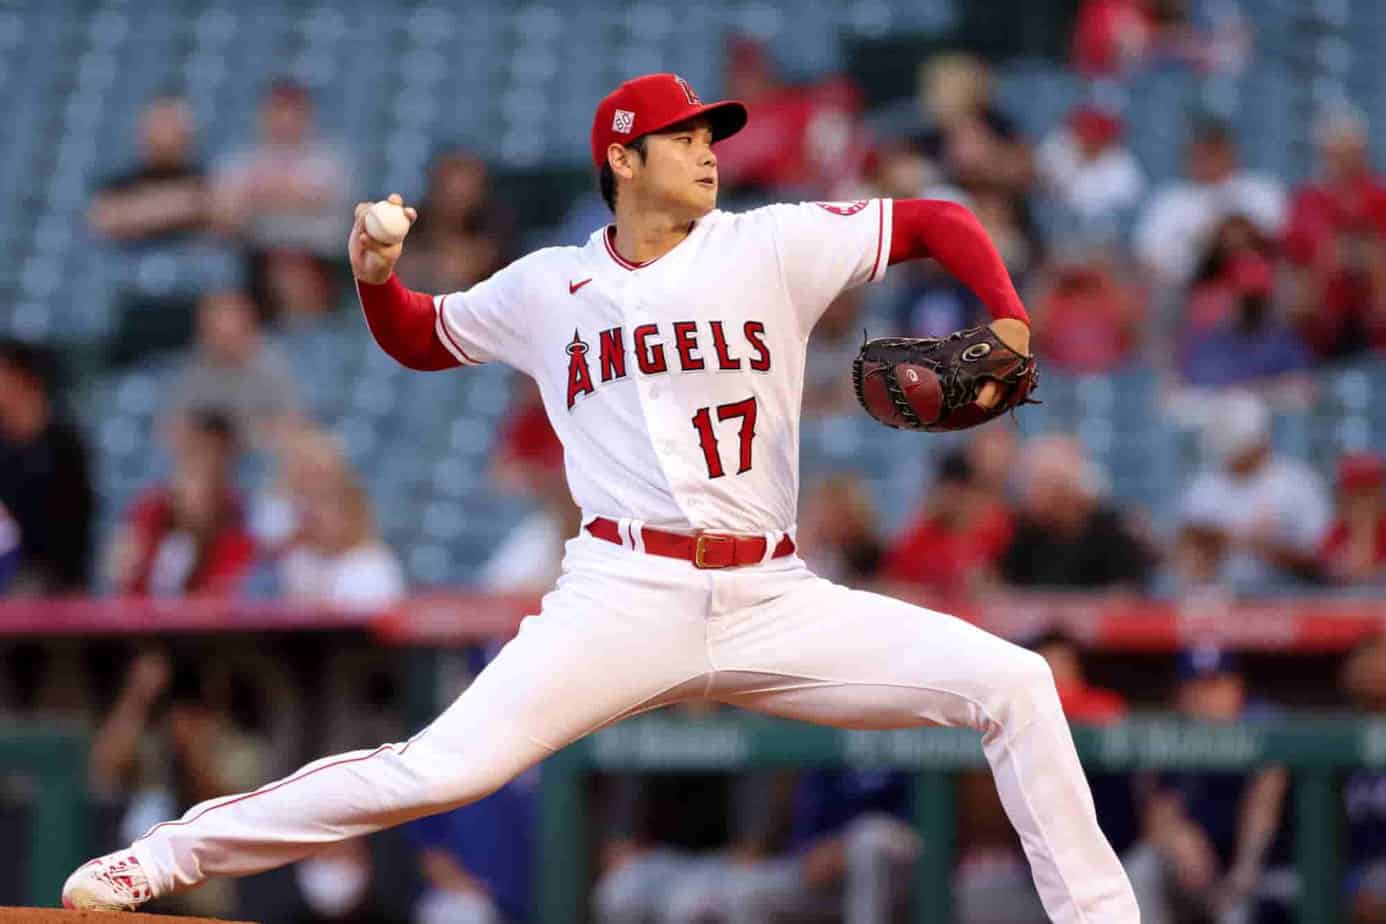 Image of Shohei Ohtani a pitcher for the Los Angeles Angels